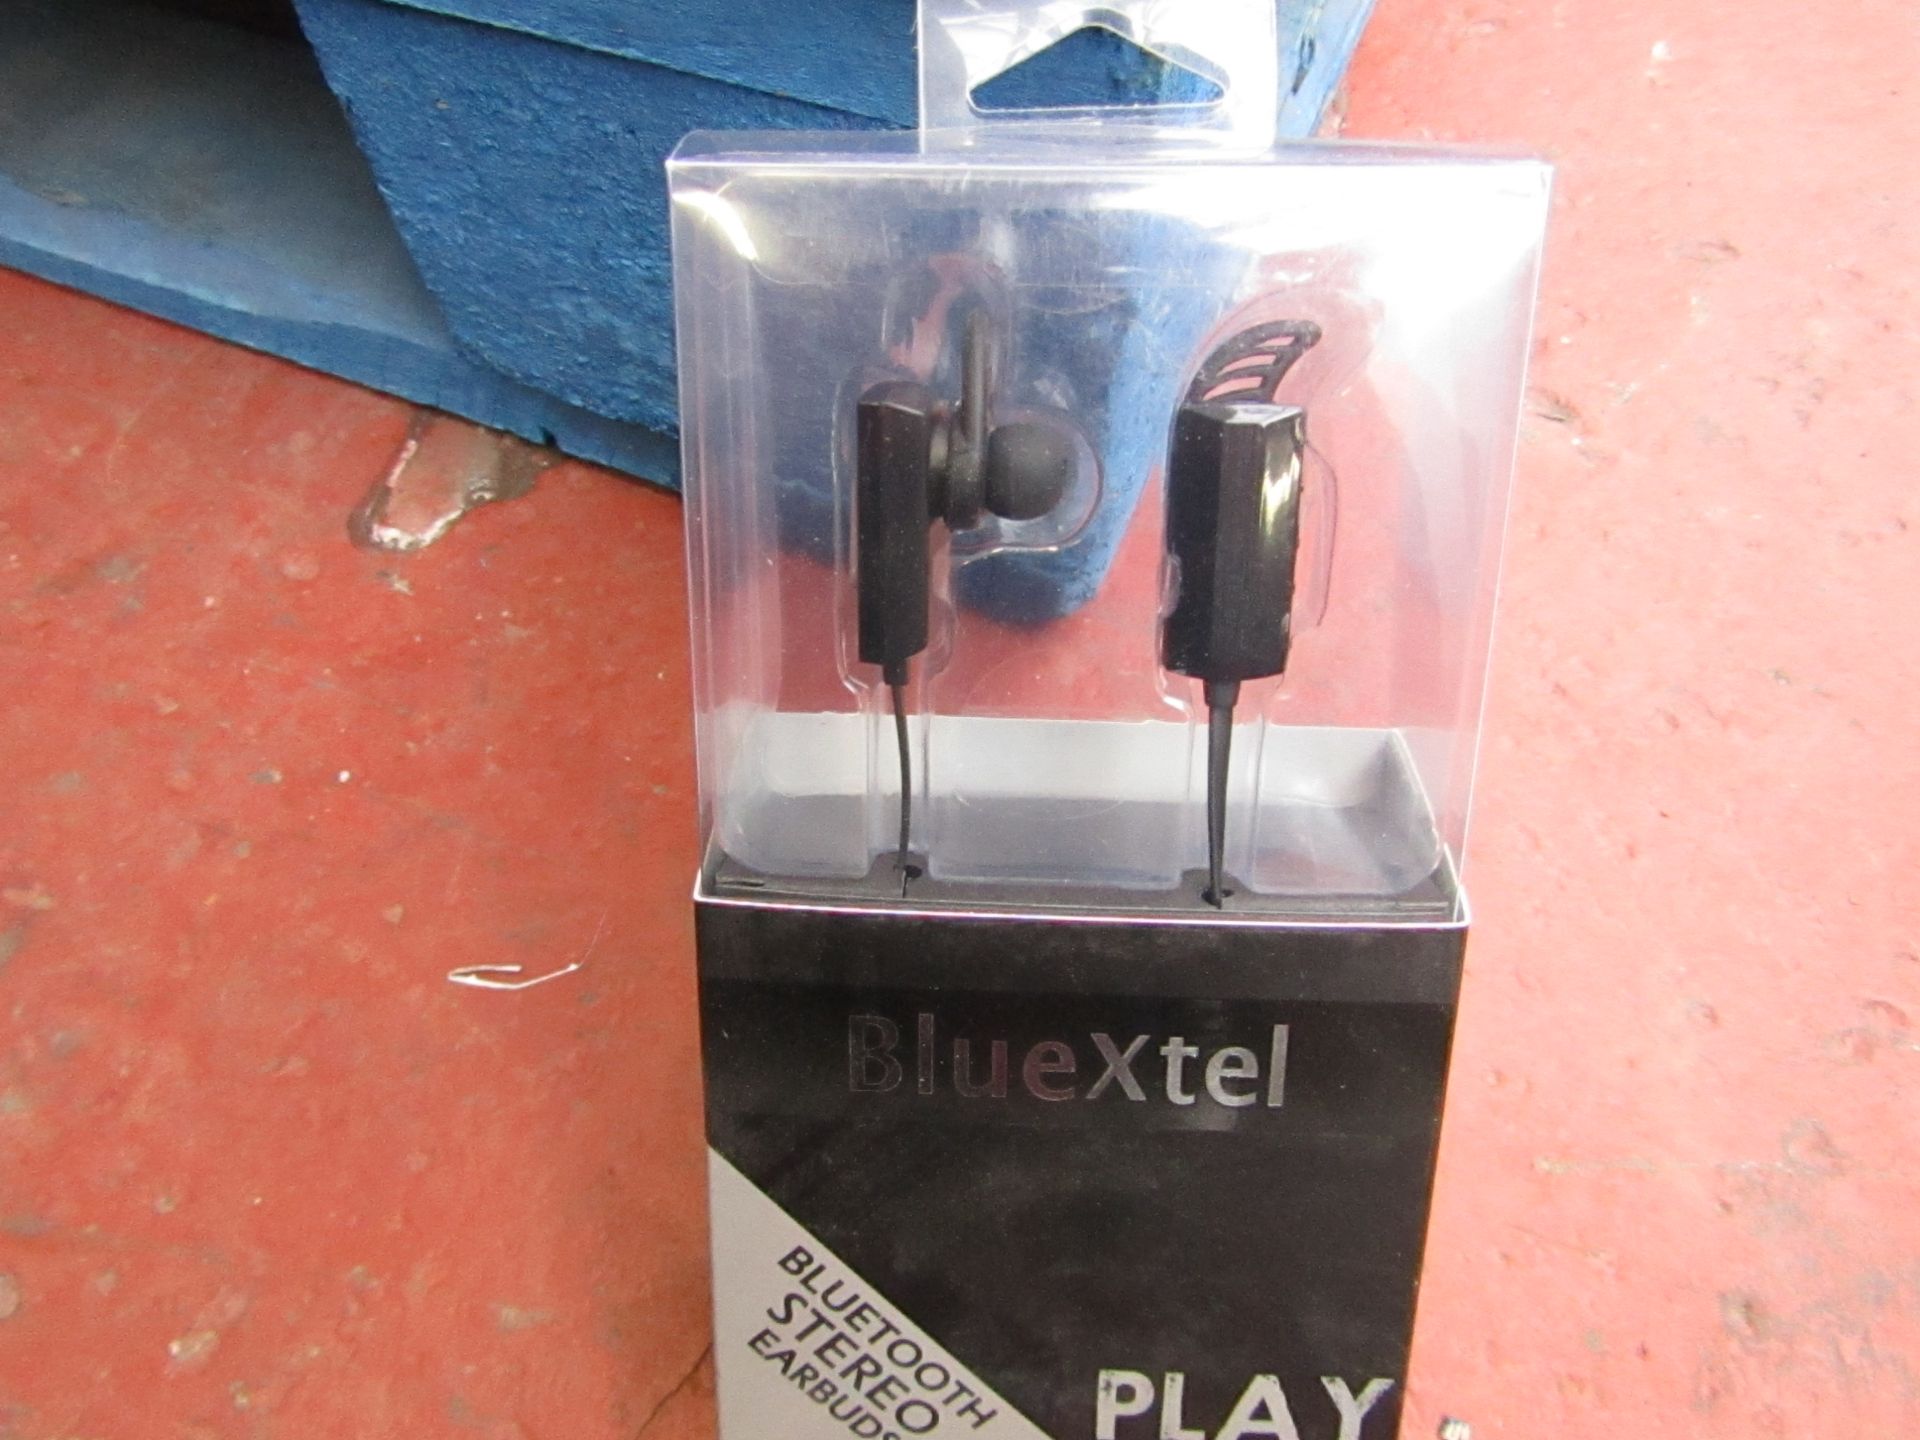 BlueXtel Bluetooth stereo earbuds, new and packaged.